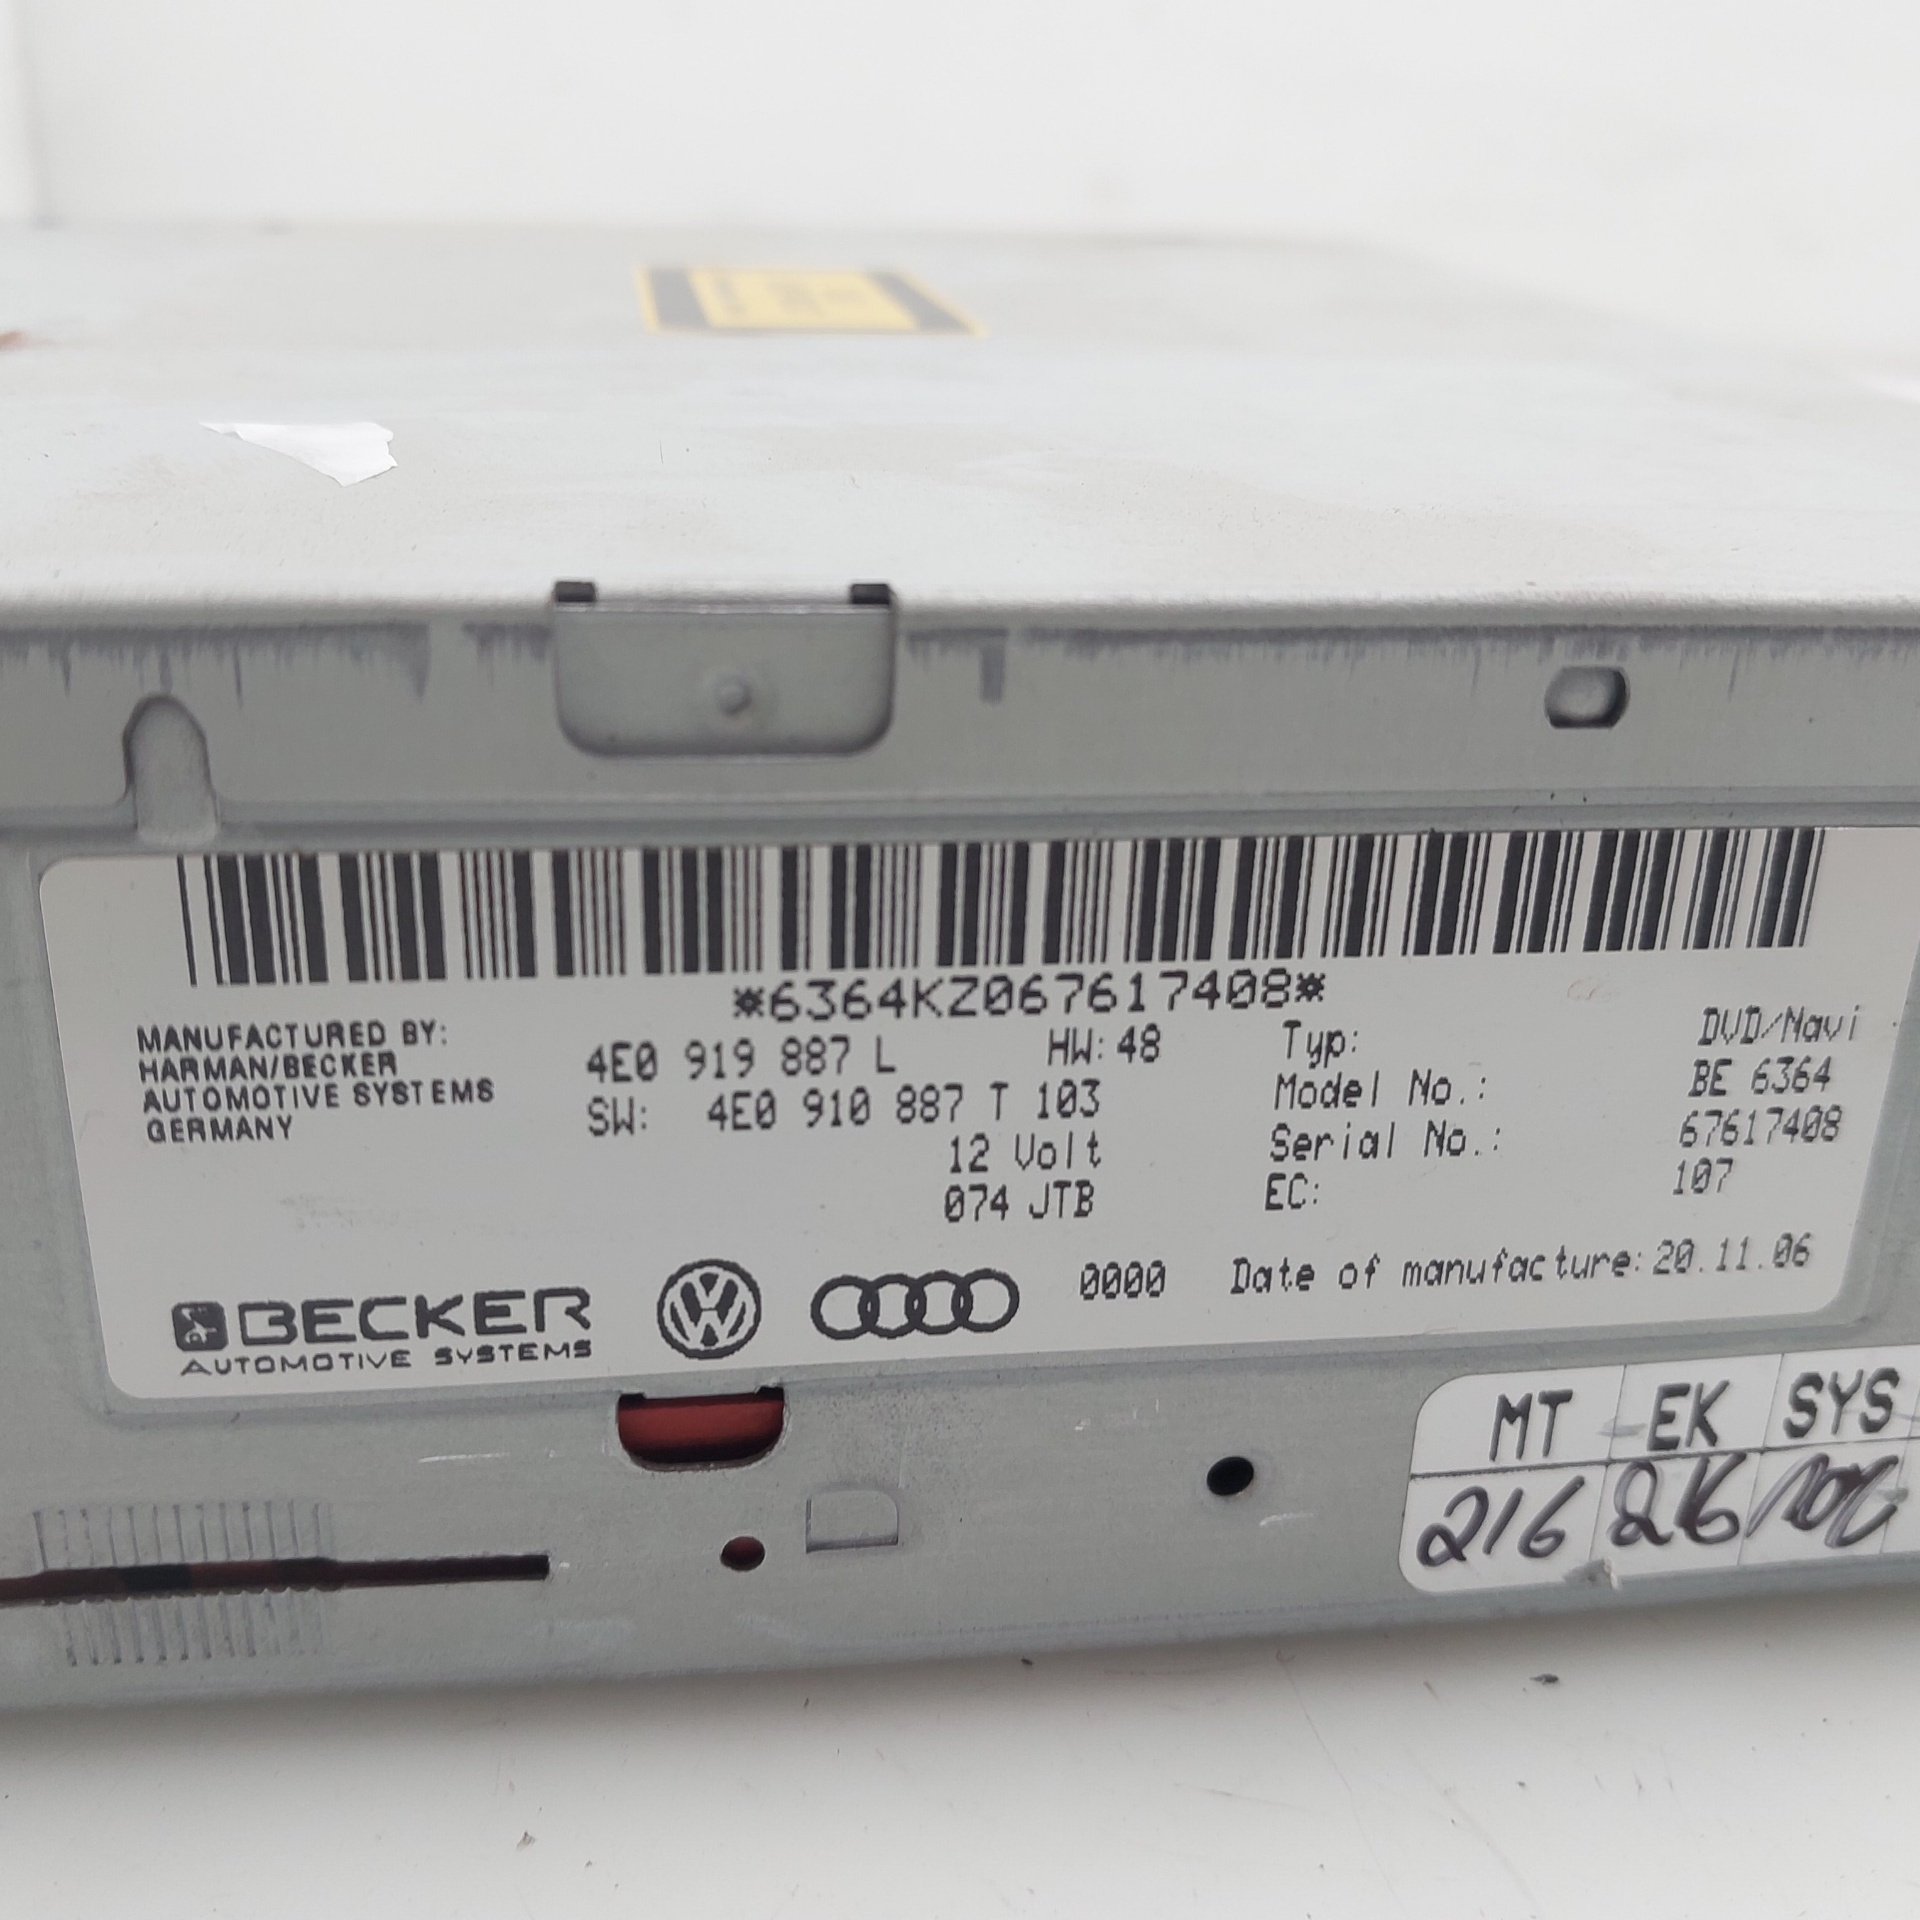 AUDI A6 C6/4F (2004-2011) Music Player Without GPS 4E0919887L 24833622